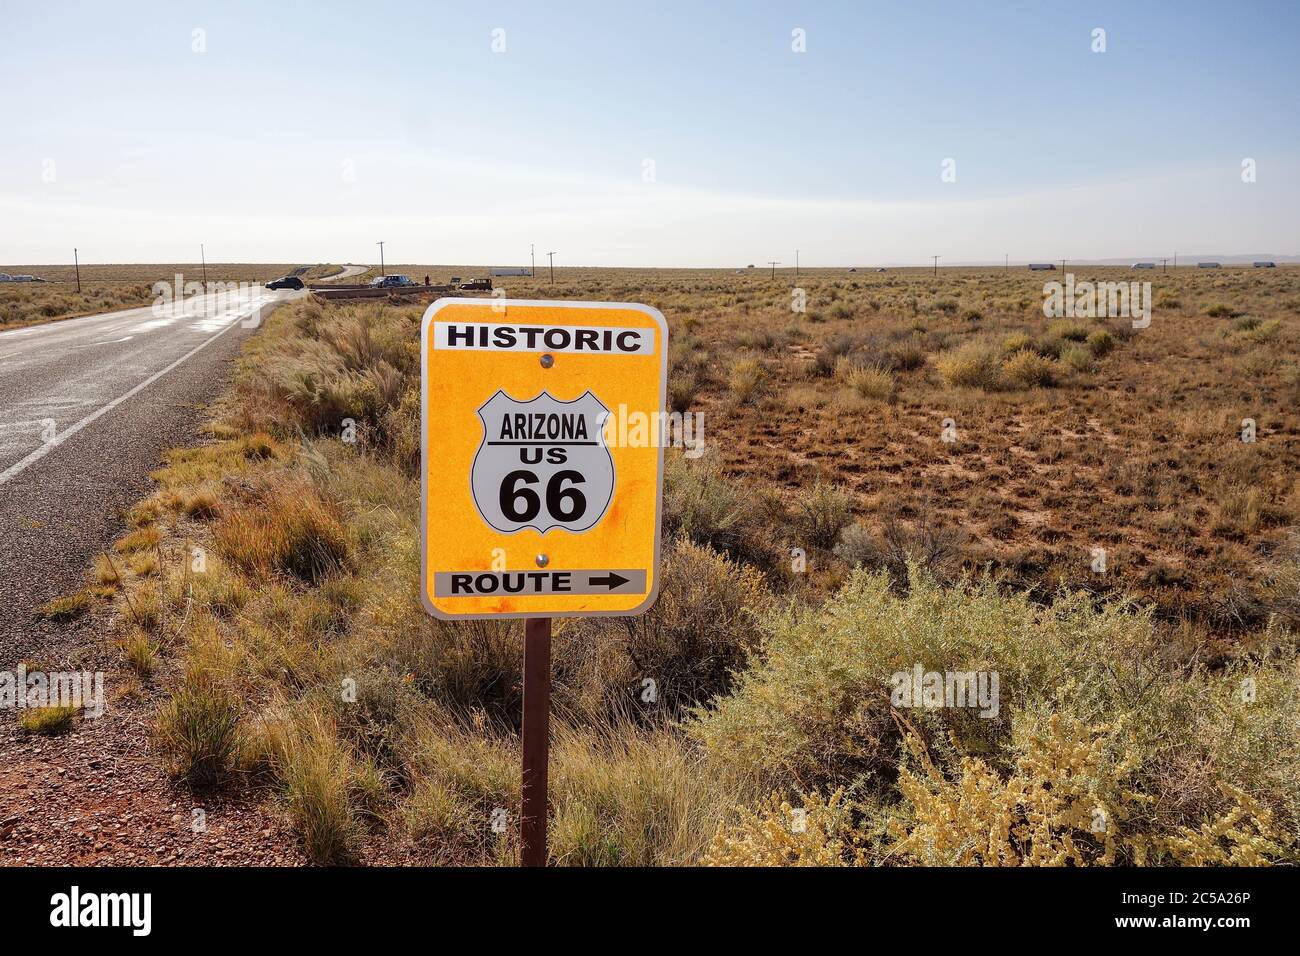 Sign indicating historic Route 66 in Arizona Stock Photo